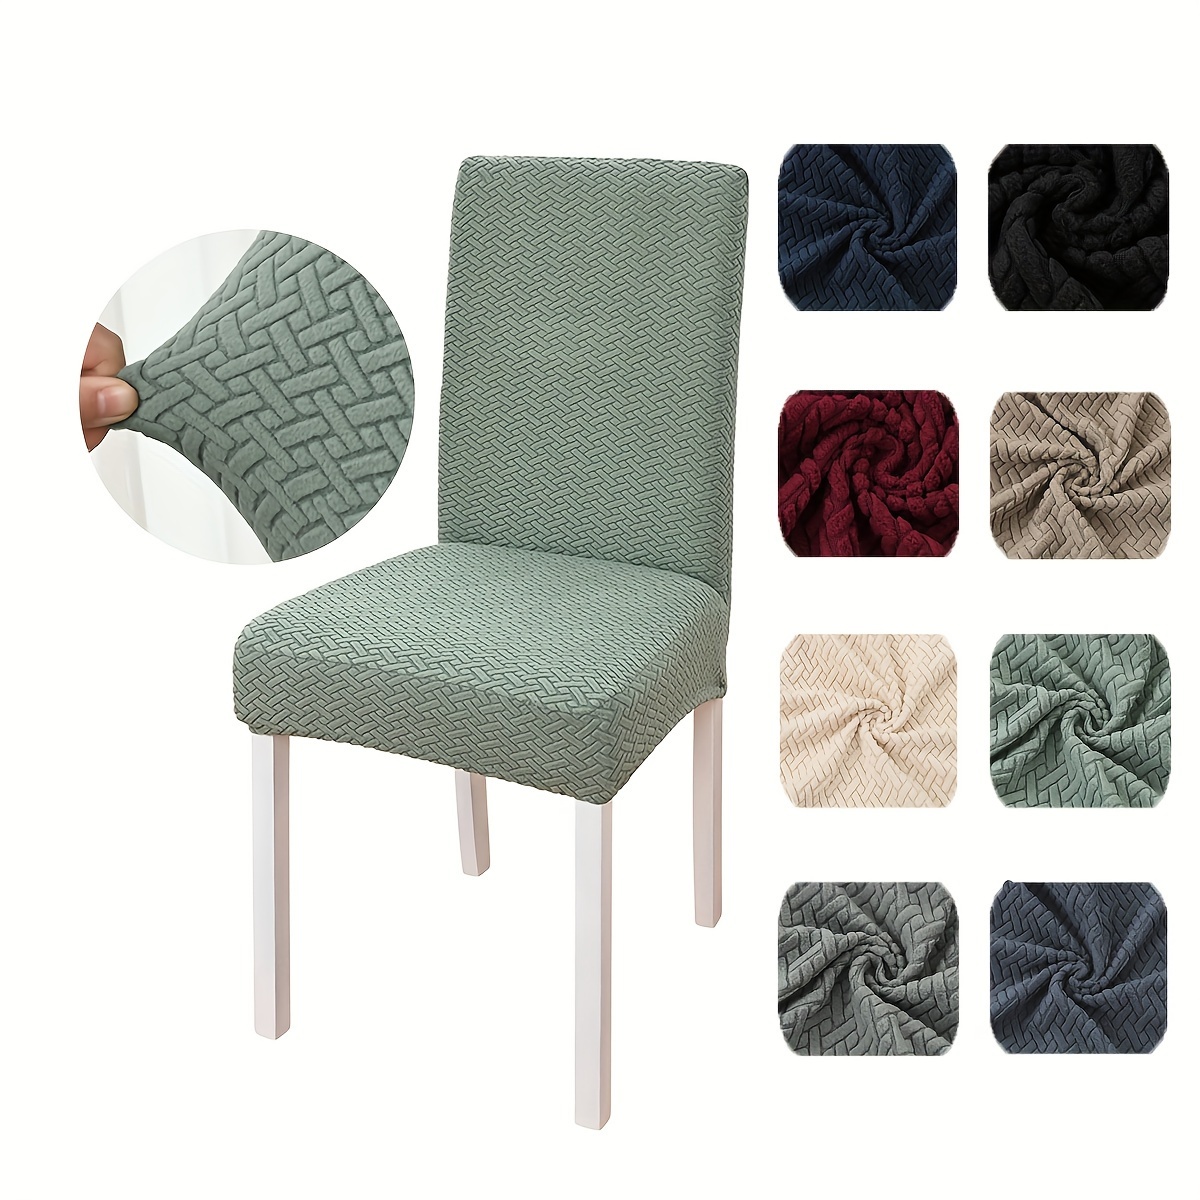 

Elastic Stretch Chair Slipcovers Contemporary Style - 1pc Washable Polyester Spandex Chair Cover For Dining Room, Living Room, Hotel - Slipcover-grip With Elastic-band Closure